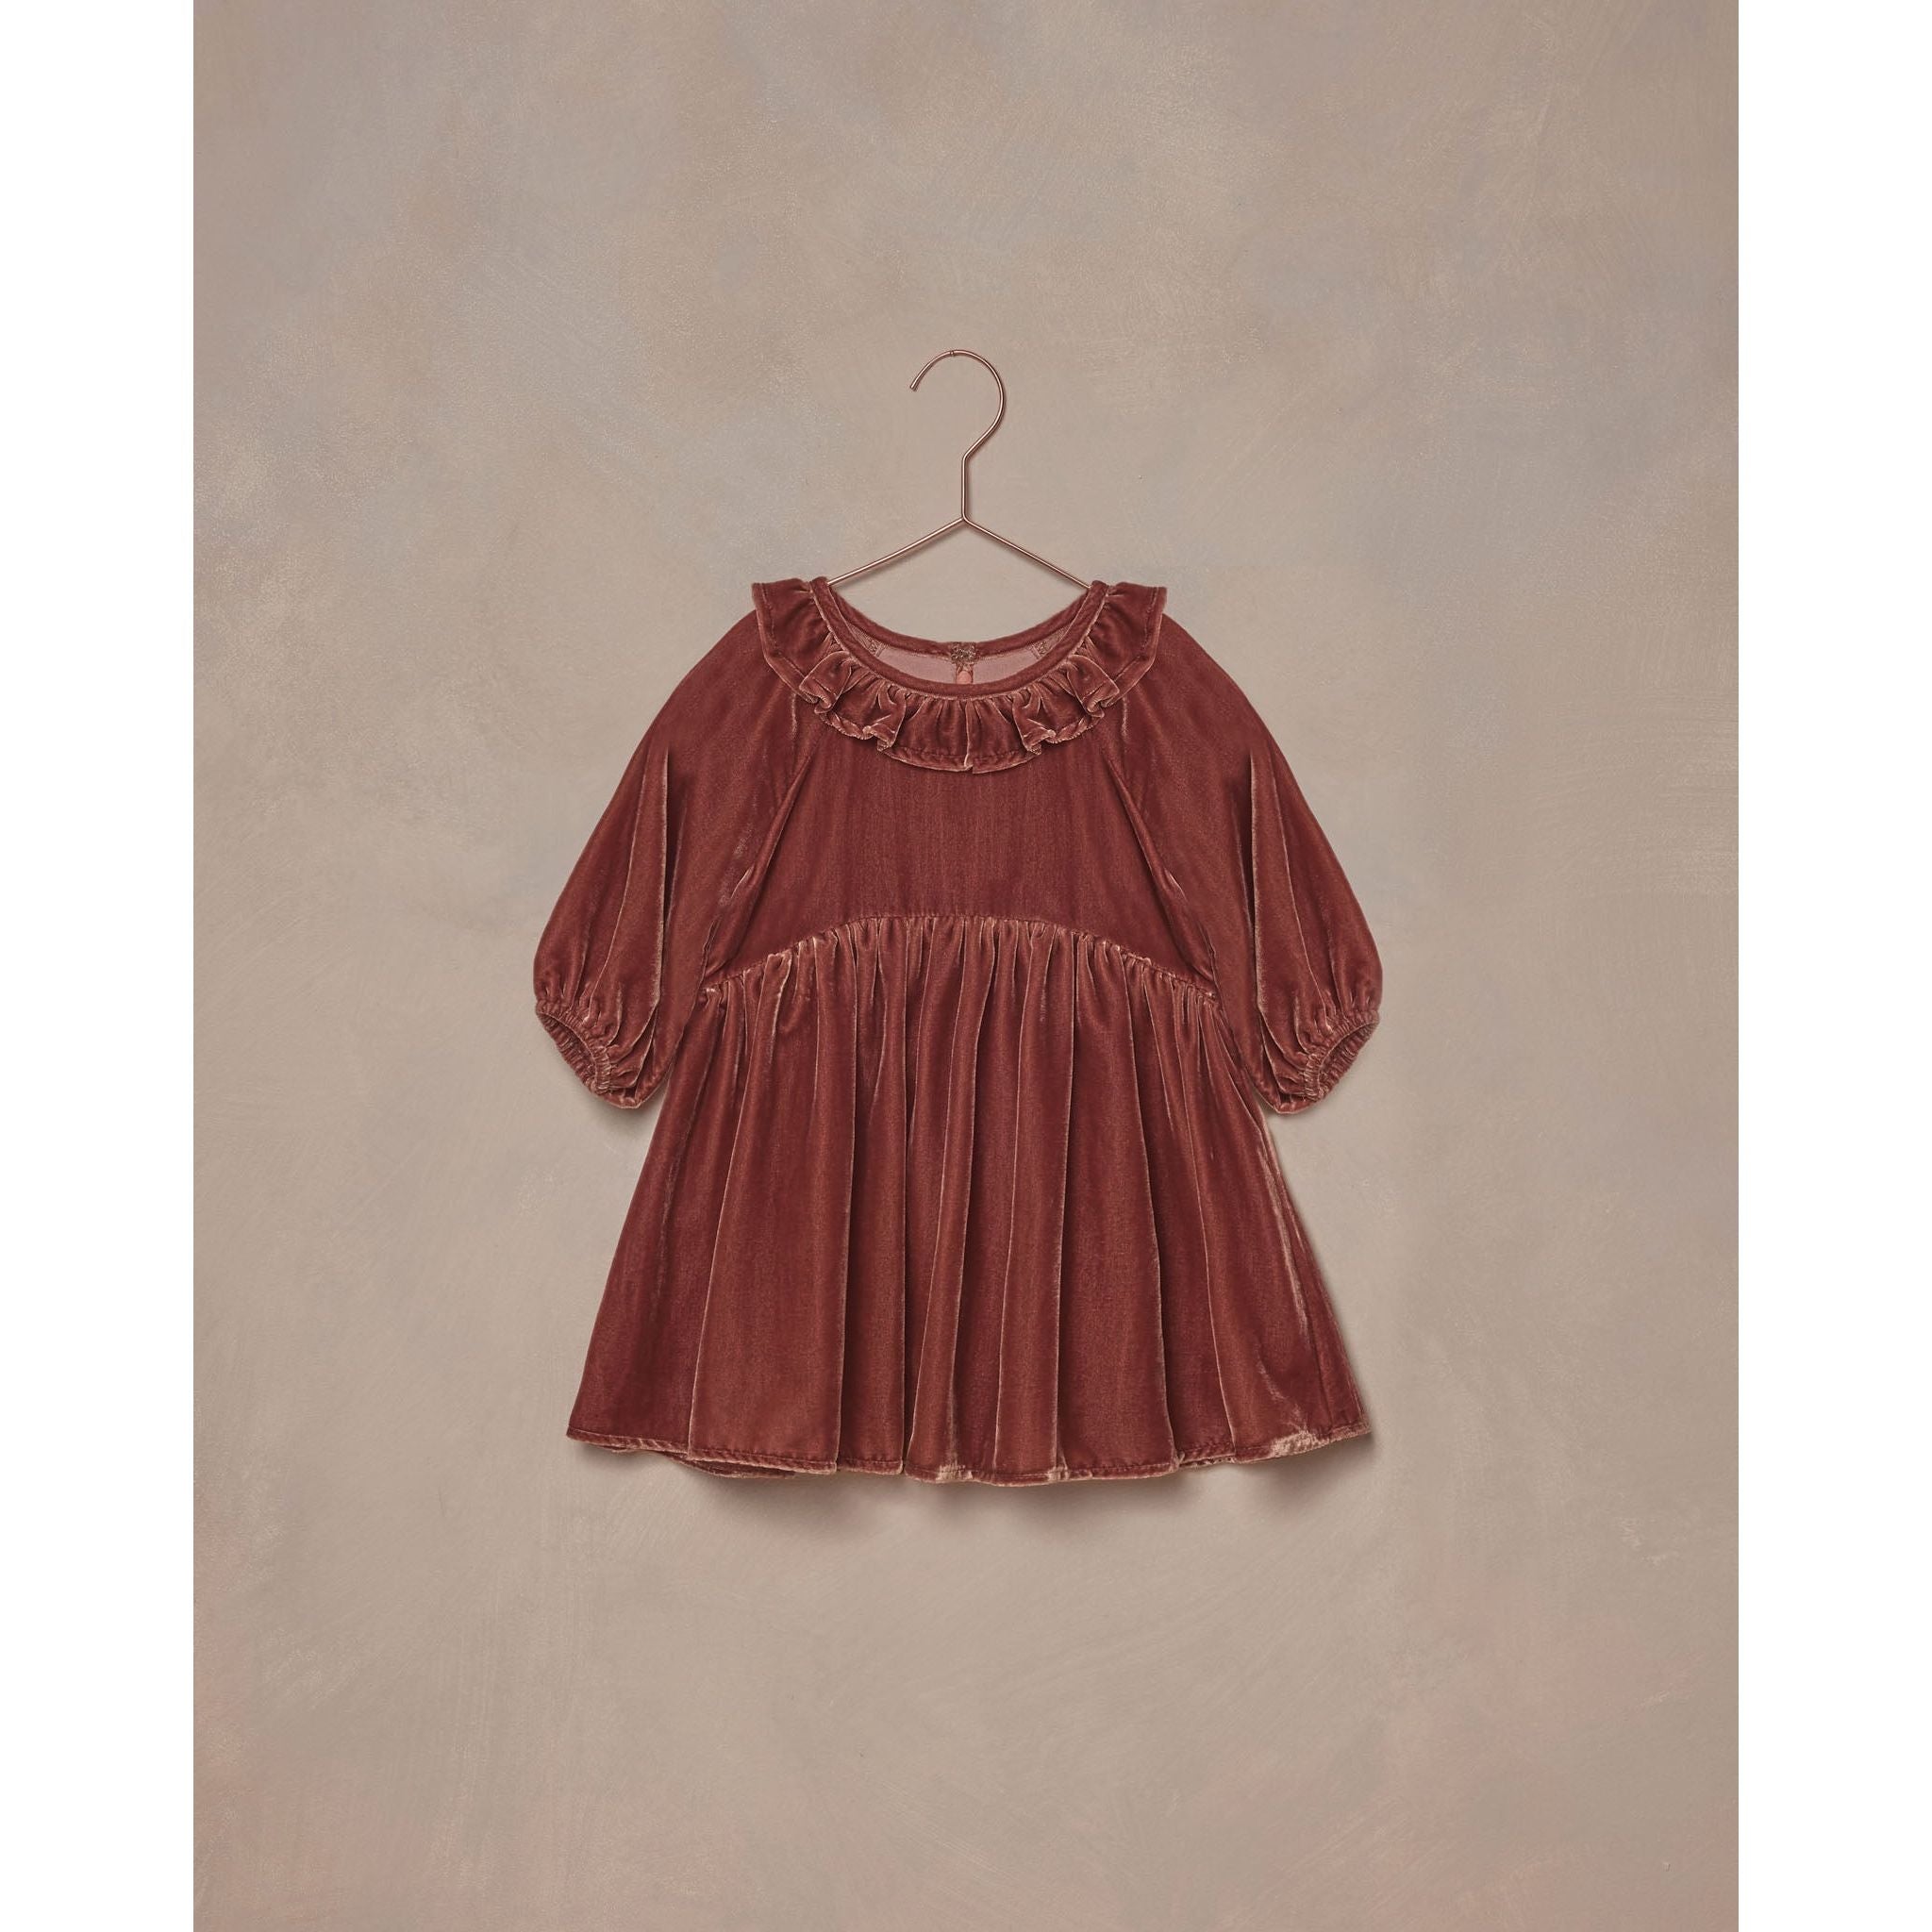 berry red colored velvet dress with ruffle collar and balloon sleeves and zipper back closure